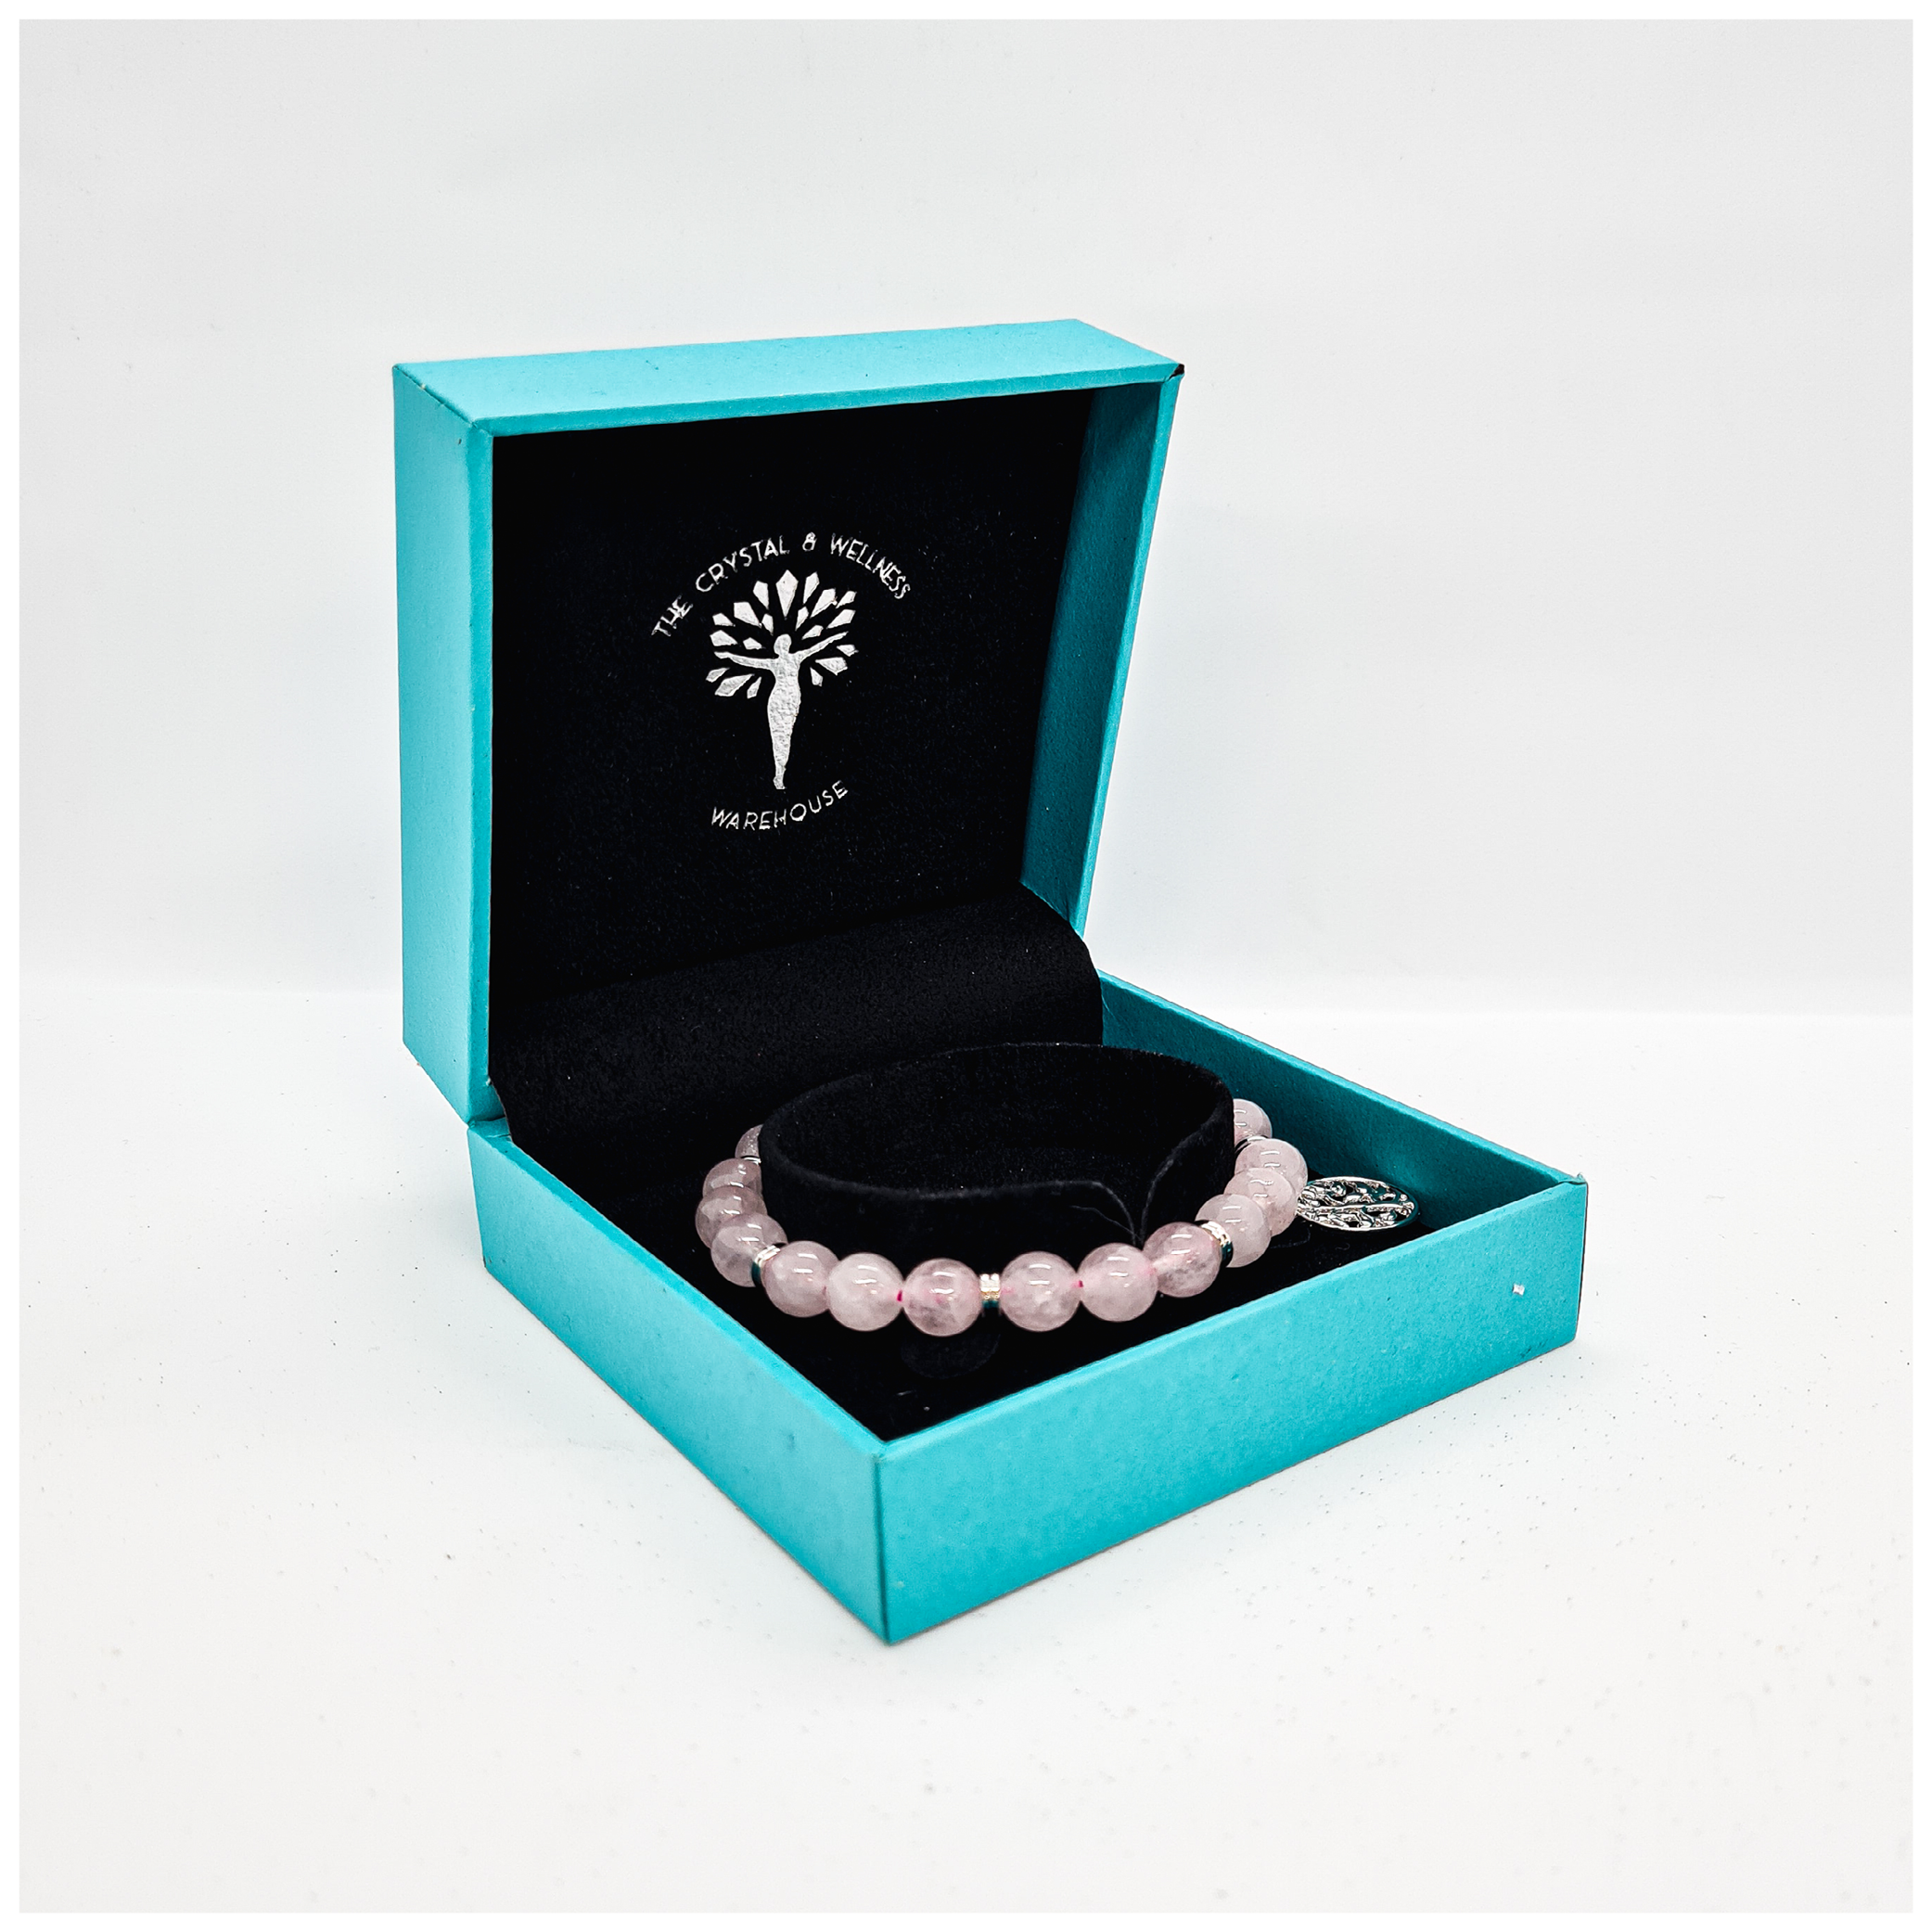 Rose Quartz 8mm crystal bead bracelet with silver tree of life charm